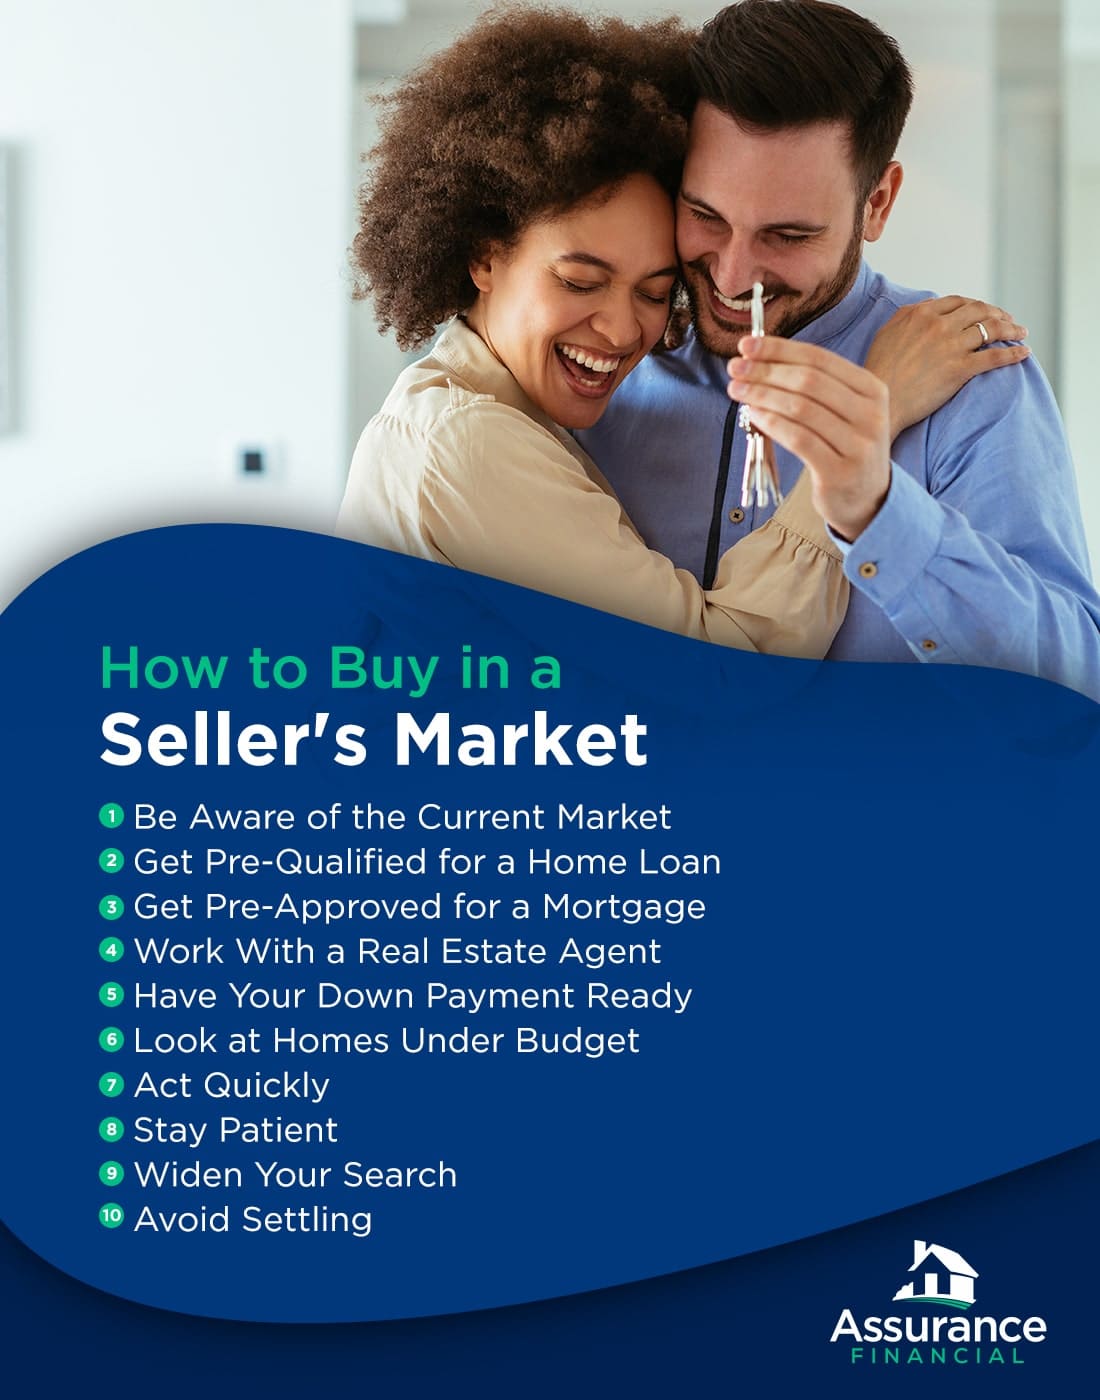 How to Buy in a Seller's Market